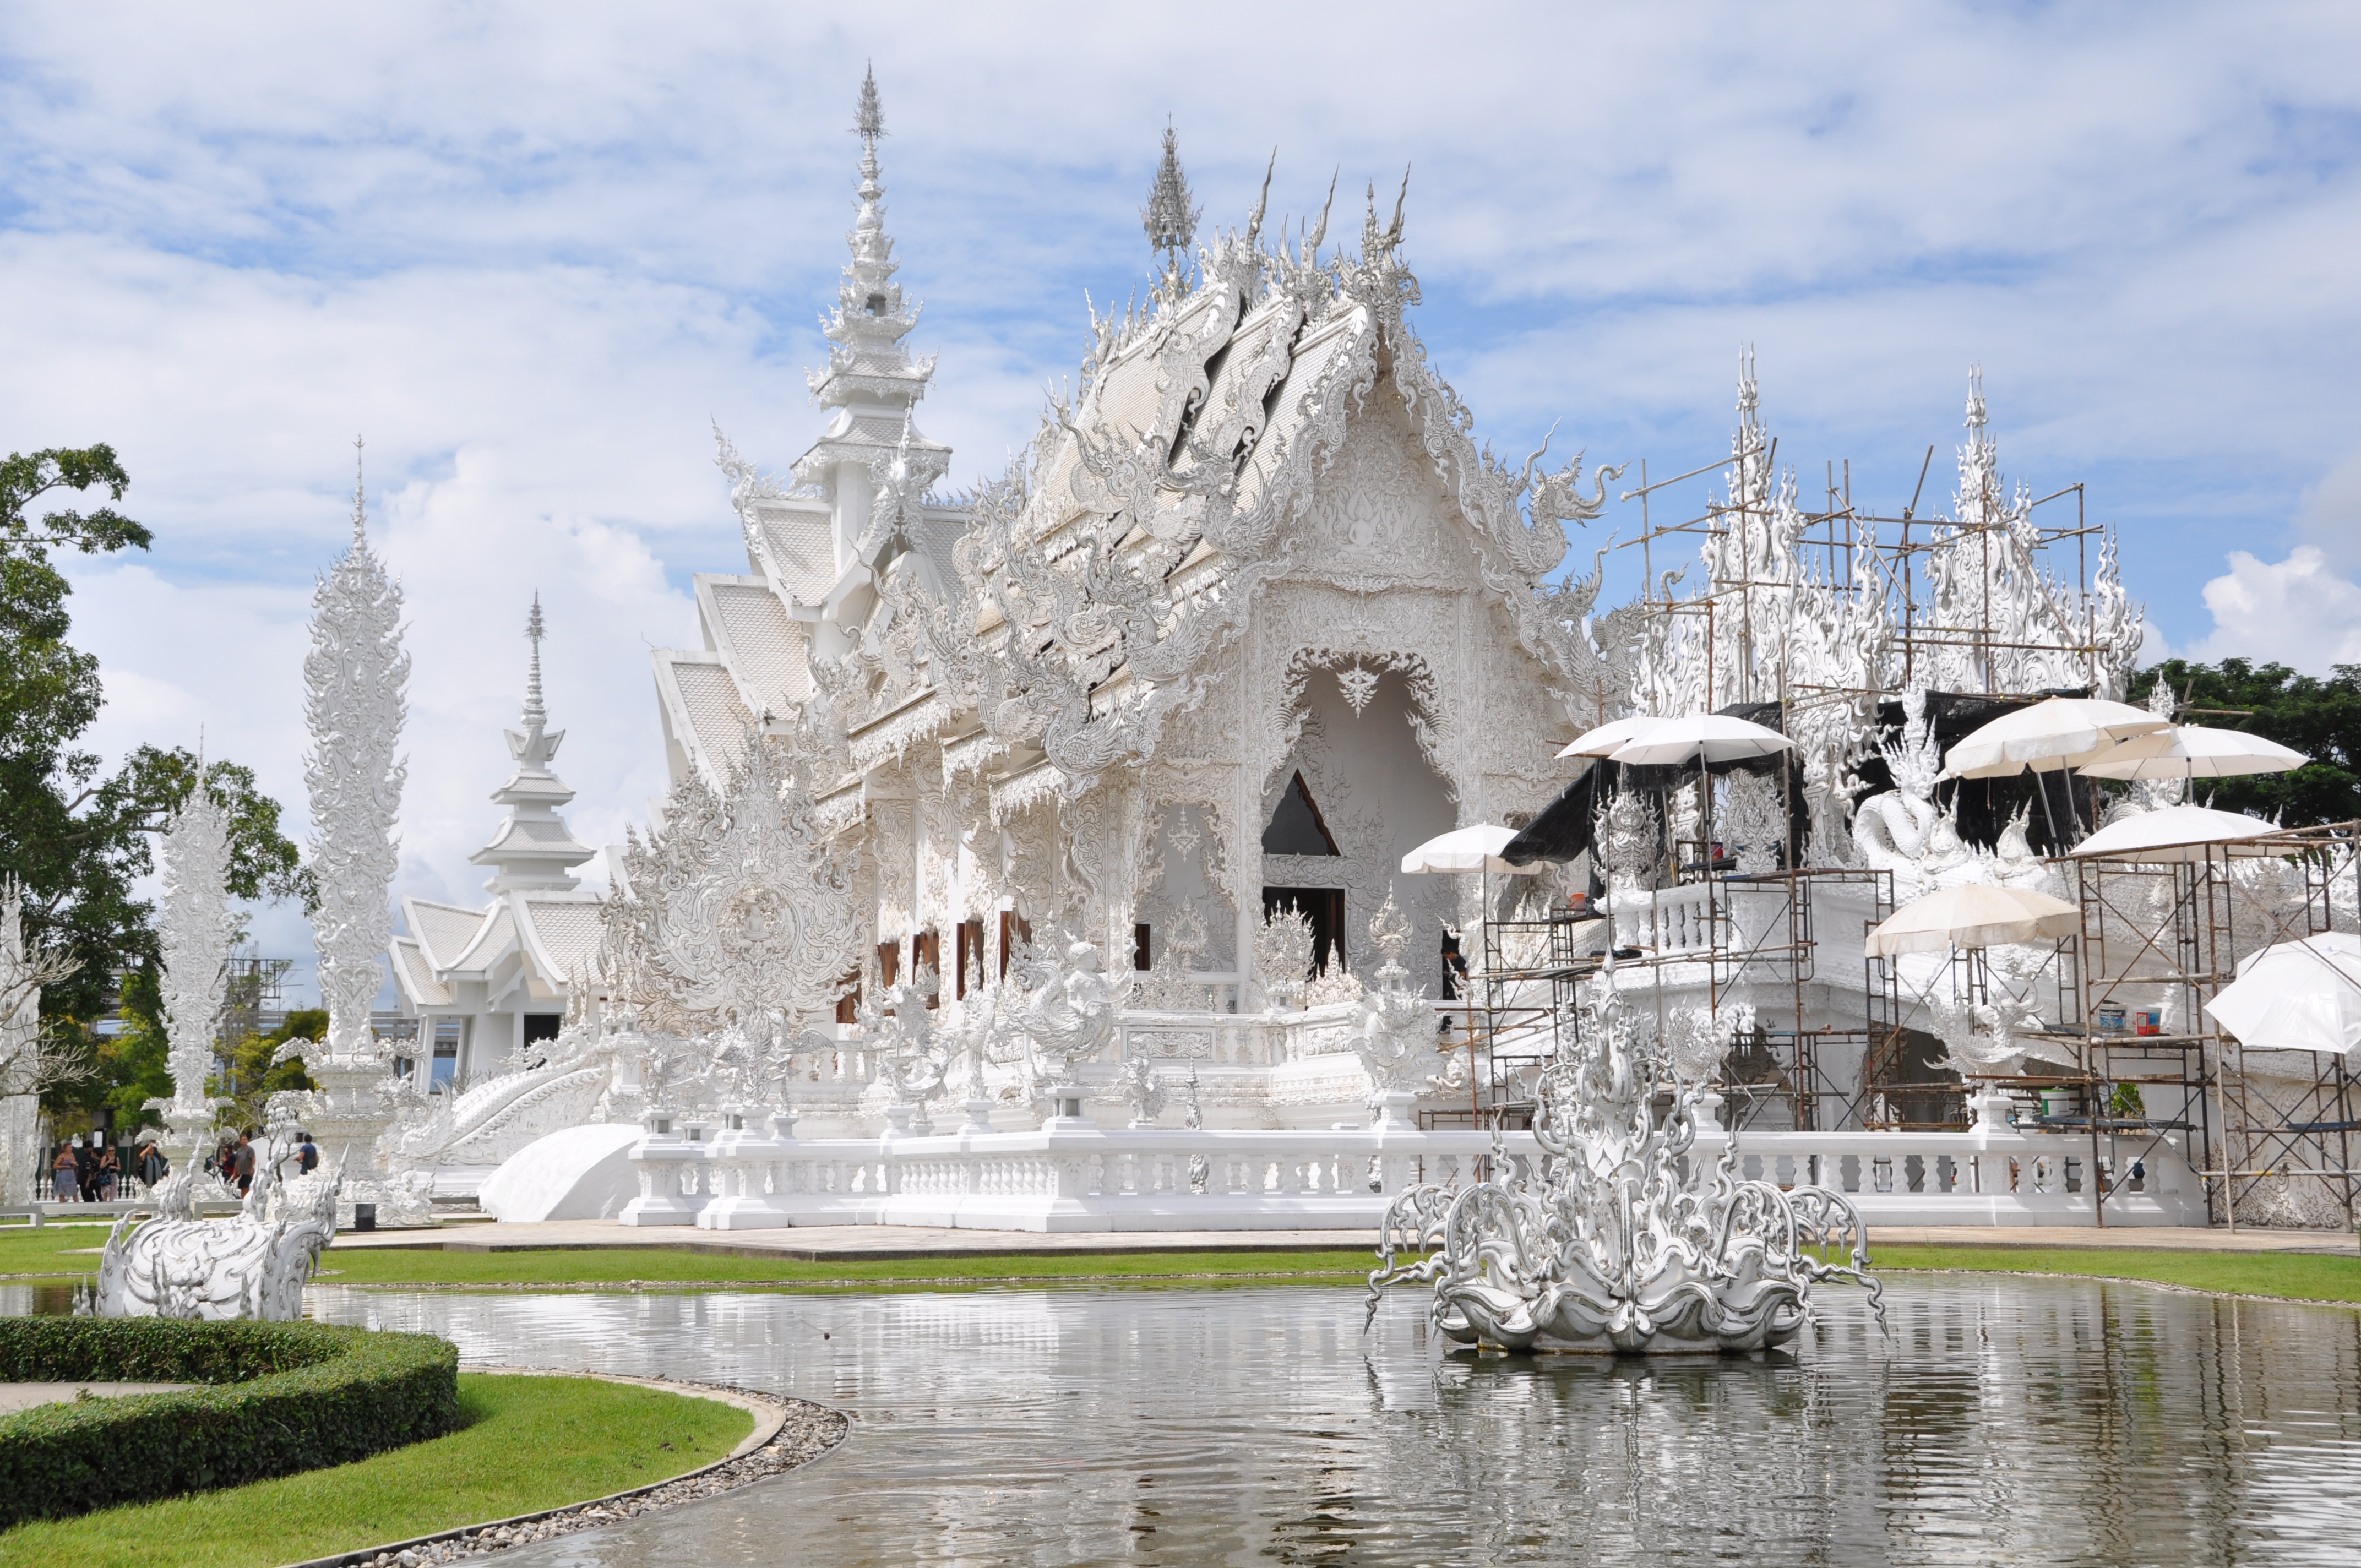 Two Travel The World - Wat Rong Khun